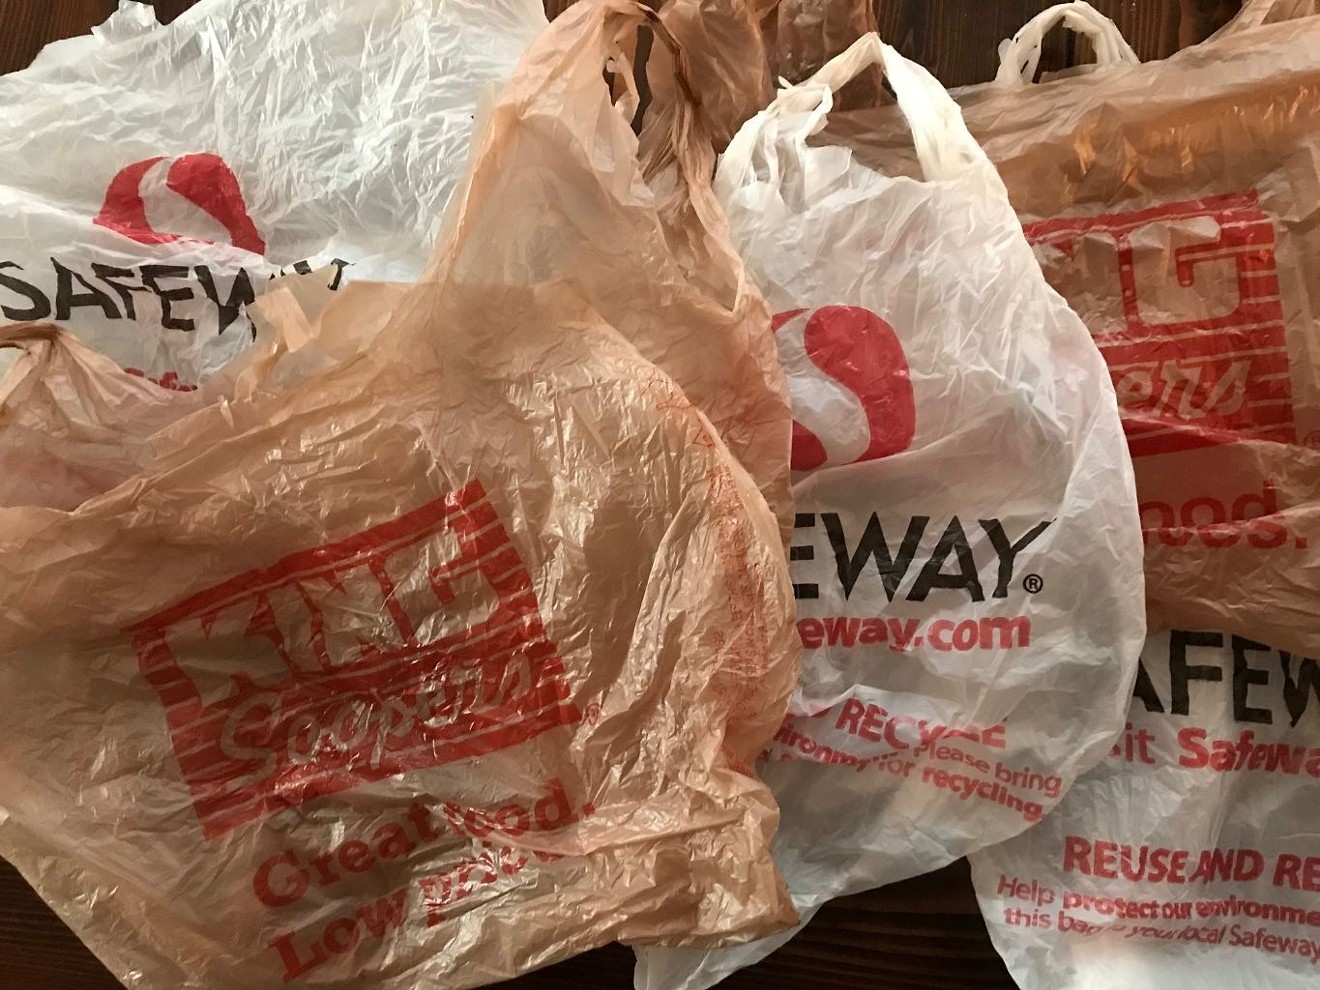 These single-use plastic grocery bags will soon be a thing of the past in Colorado.